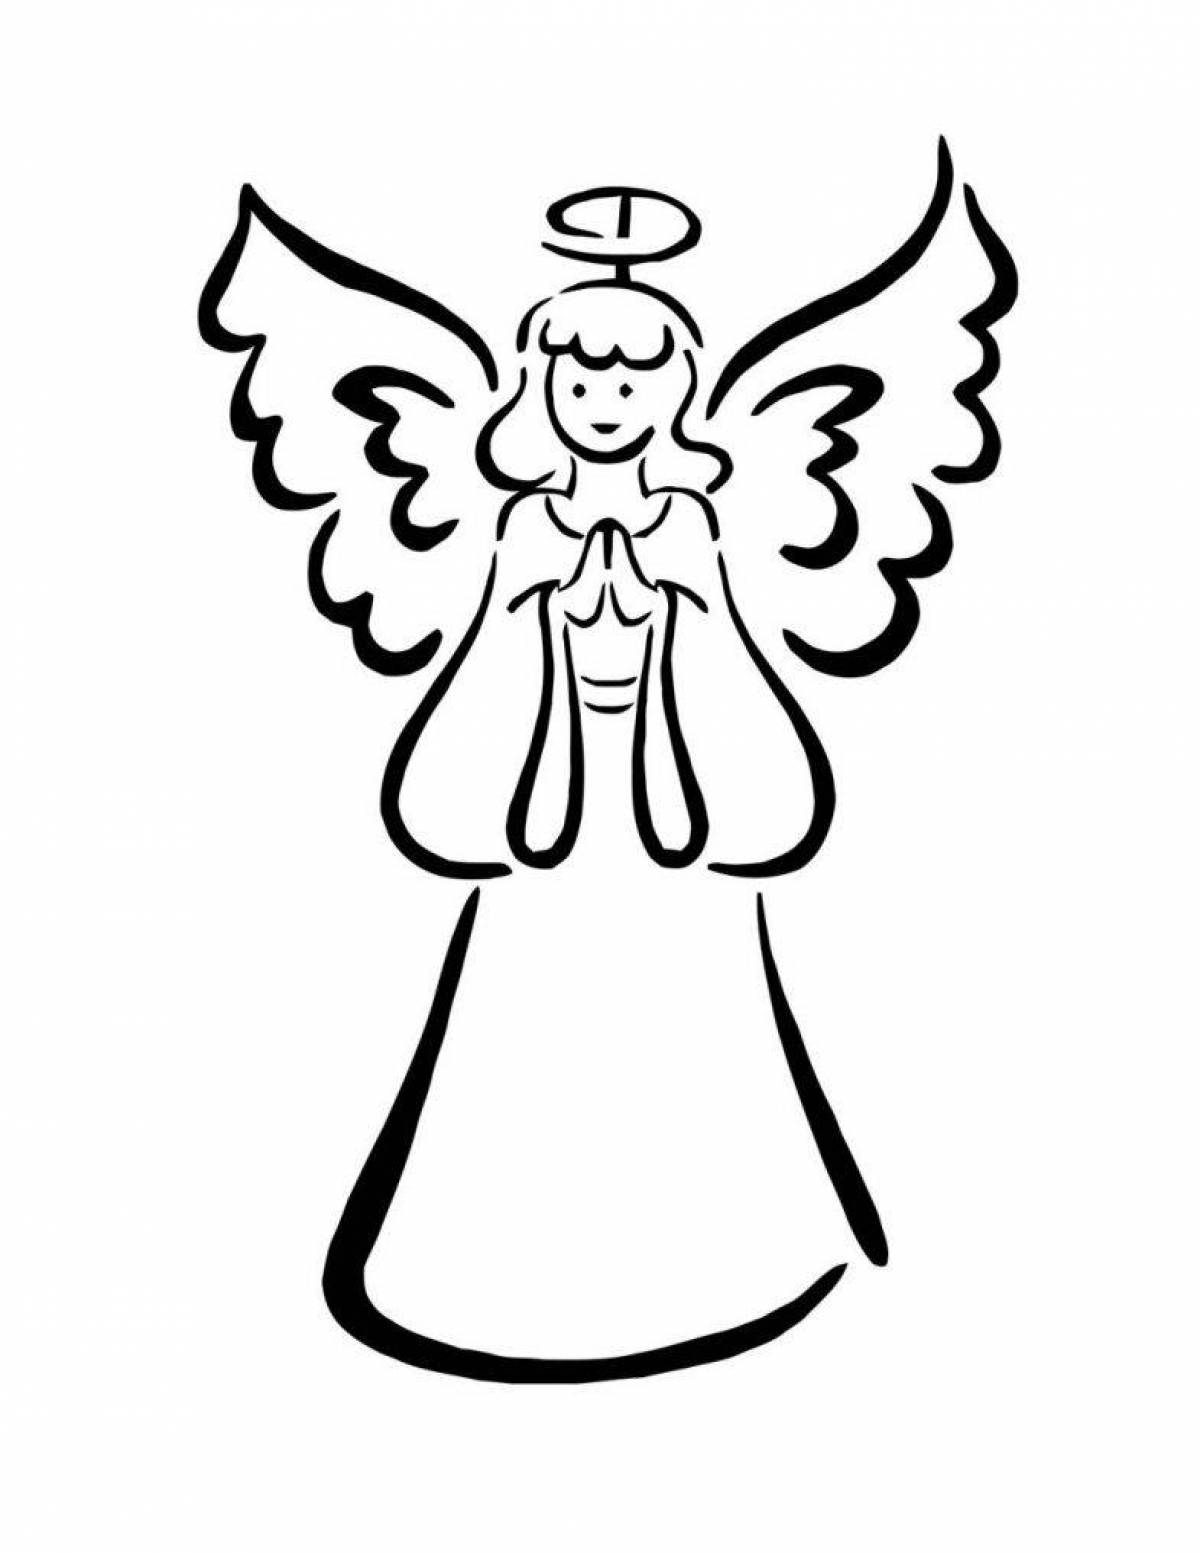 Amazing angel coloring book